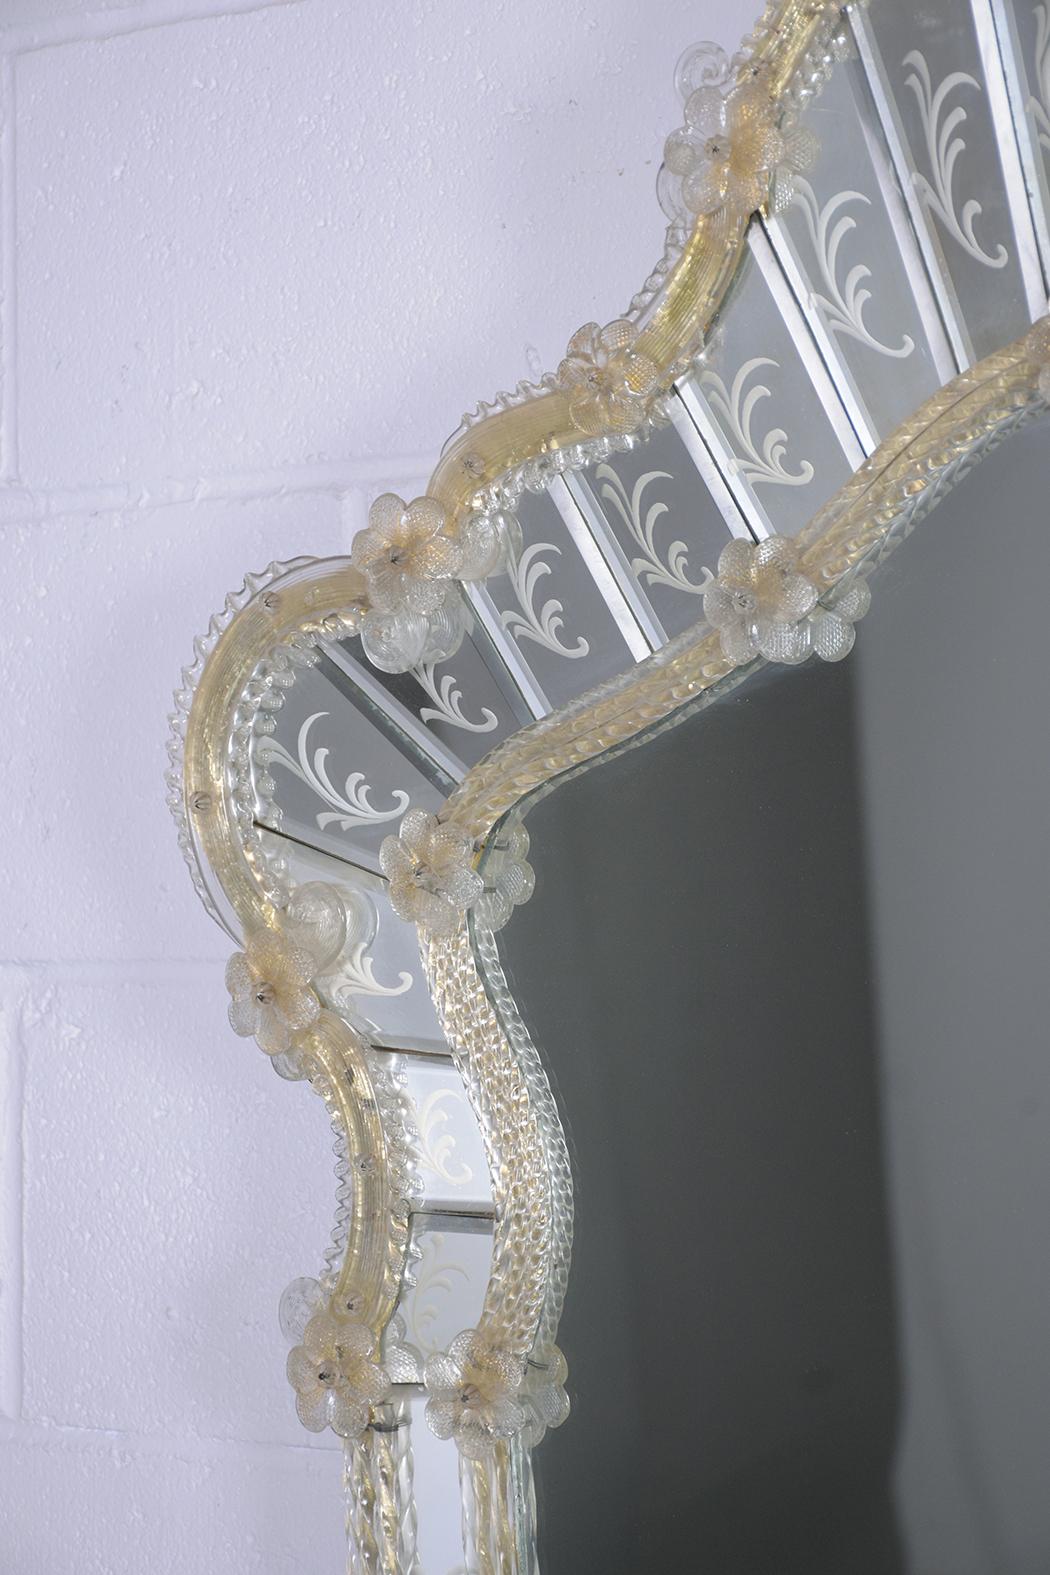 Early 20th Century Vintage Italian Hand-Crafted Mirror with Etched Leaf Design & Murano Glass